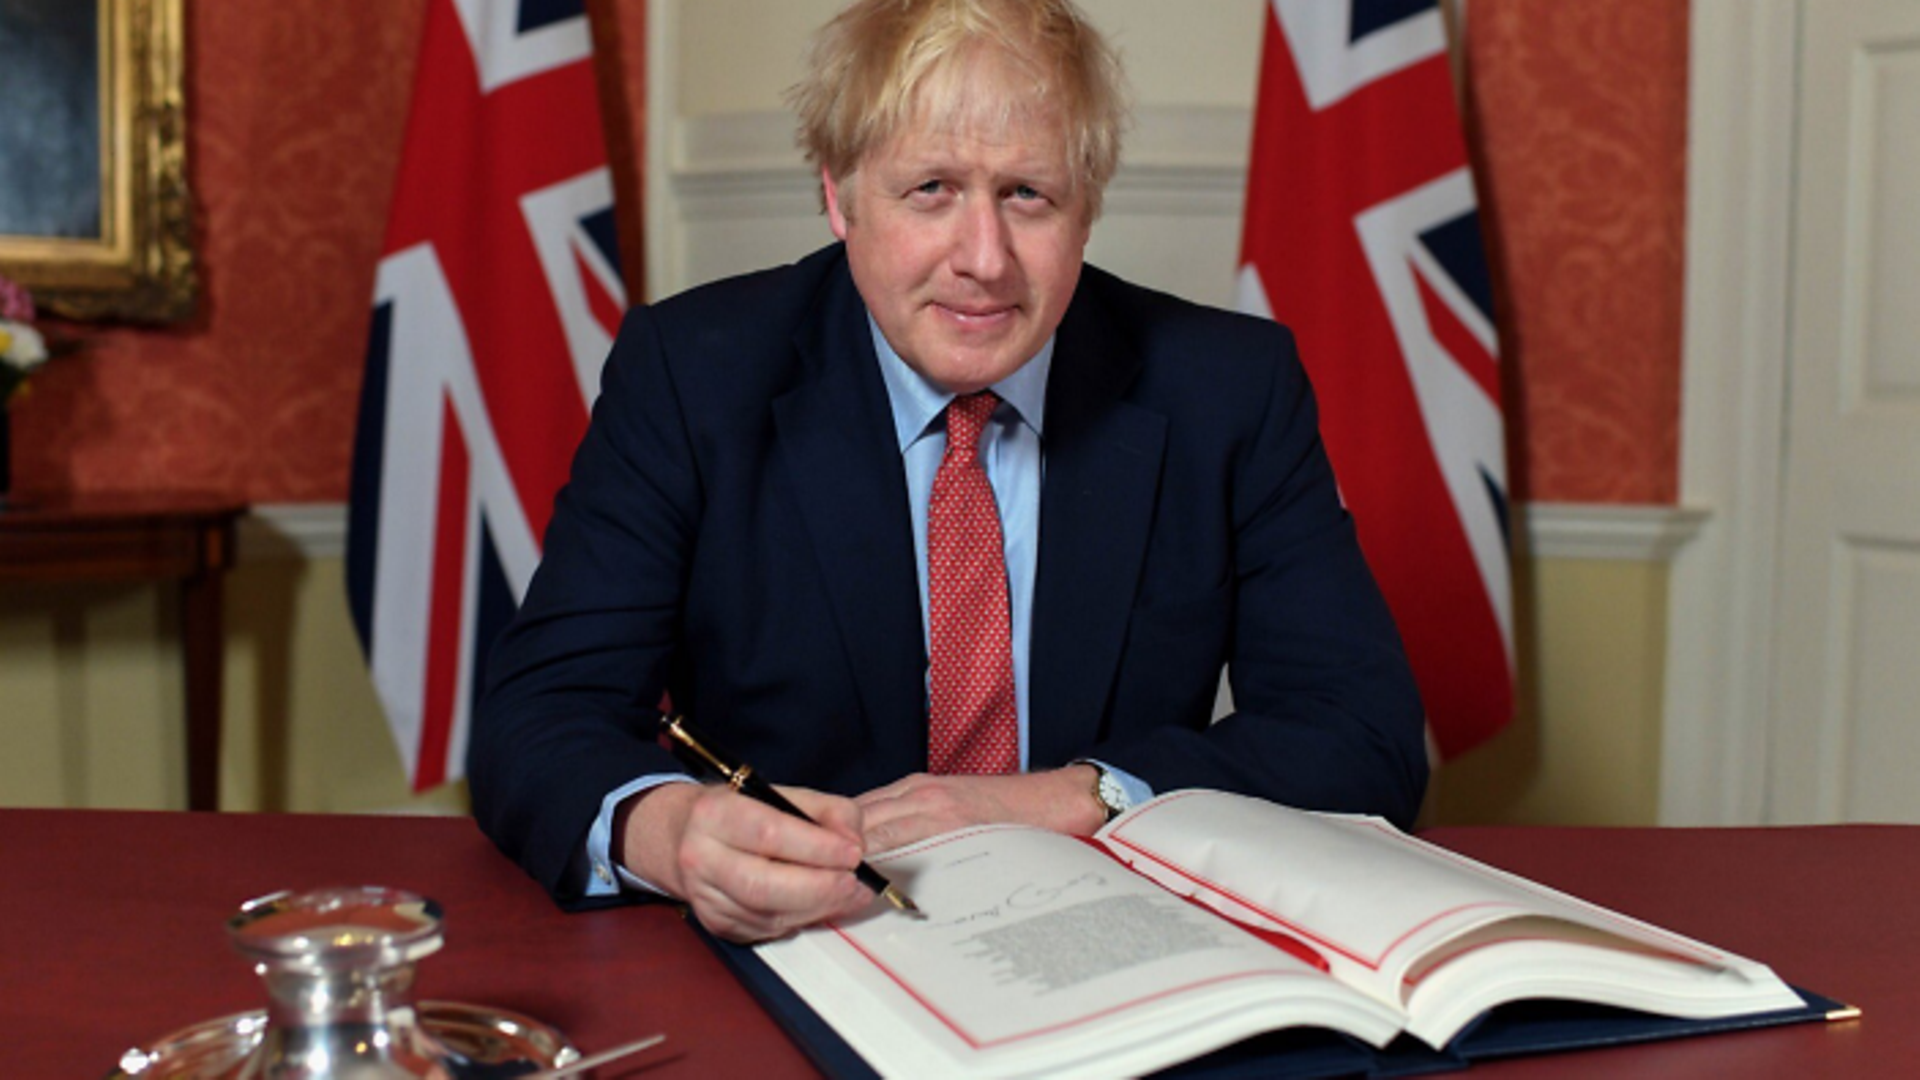 Boris Johnson signs the Withdrawal Agreement in January - Credit: Twitter